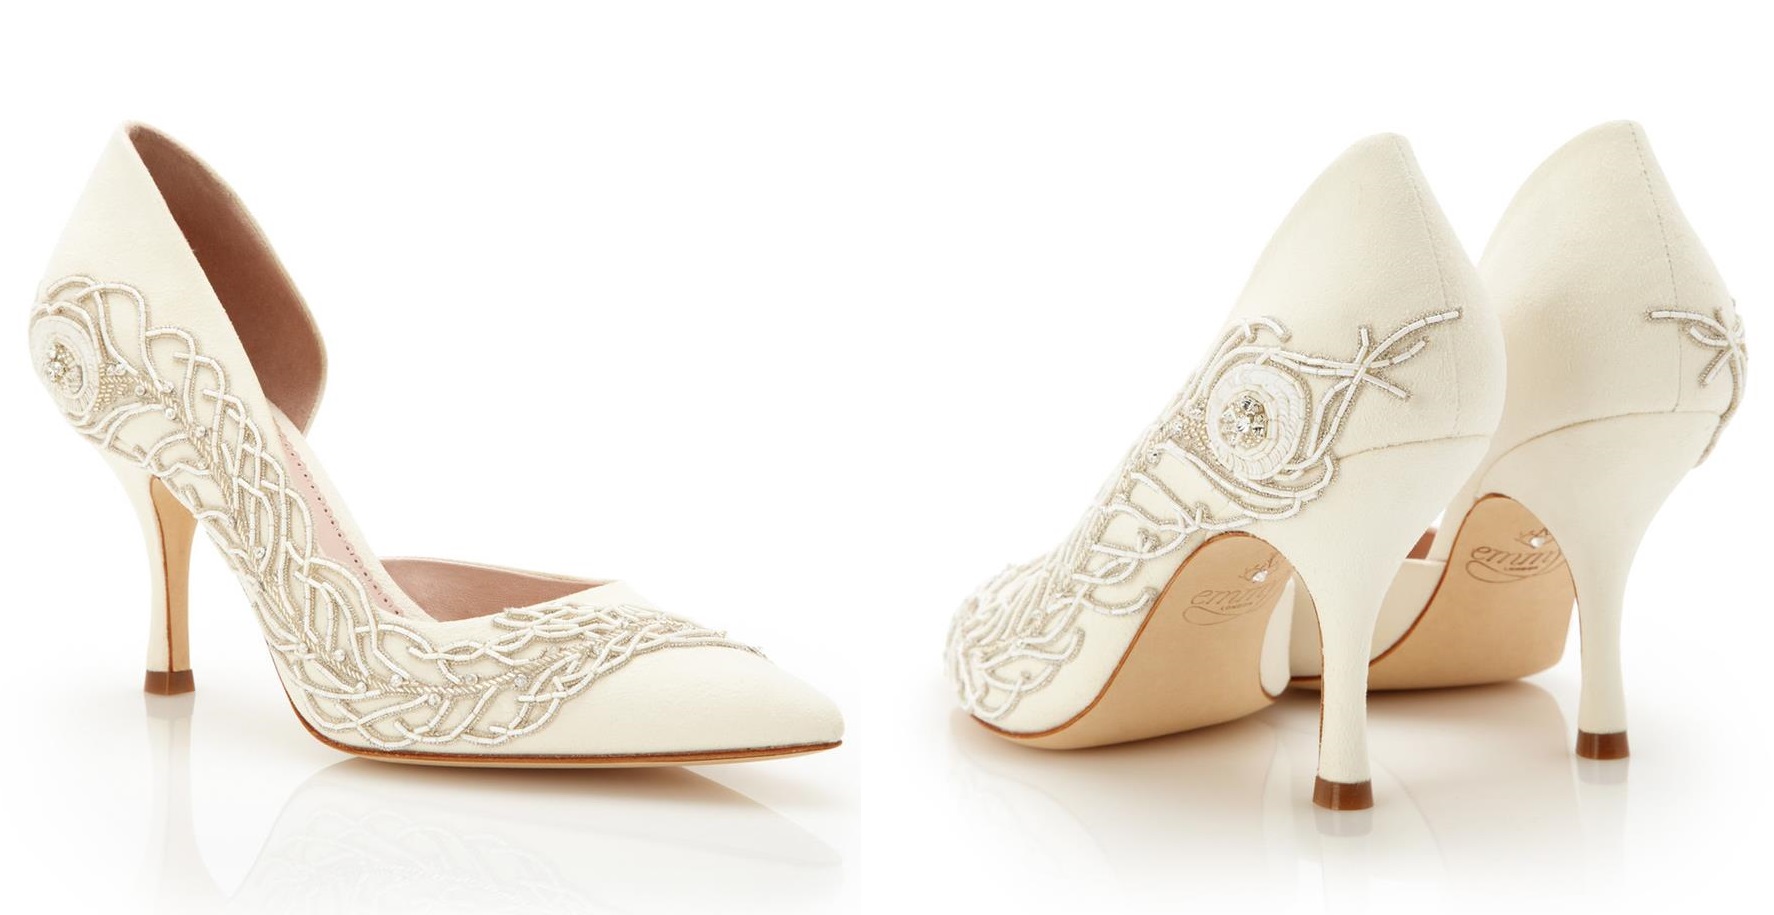 Stunning New Spring 2015 Bridal Shoes from Emmy London - Amelia